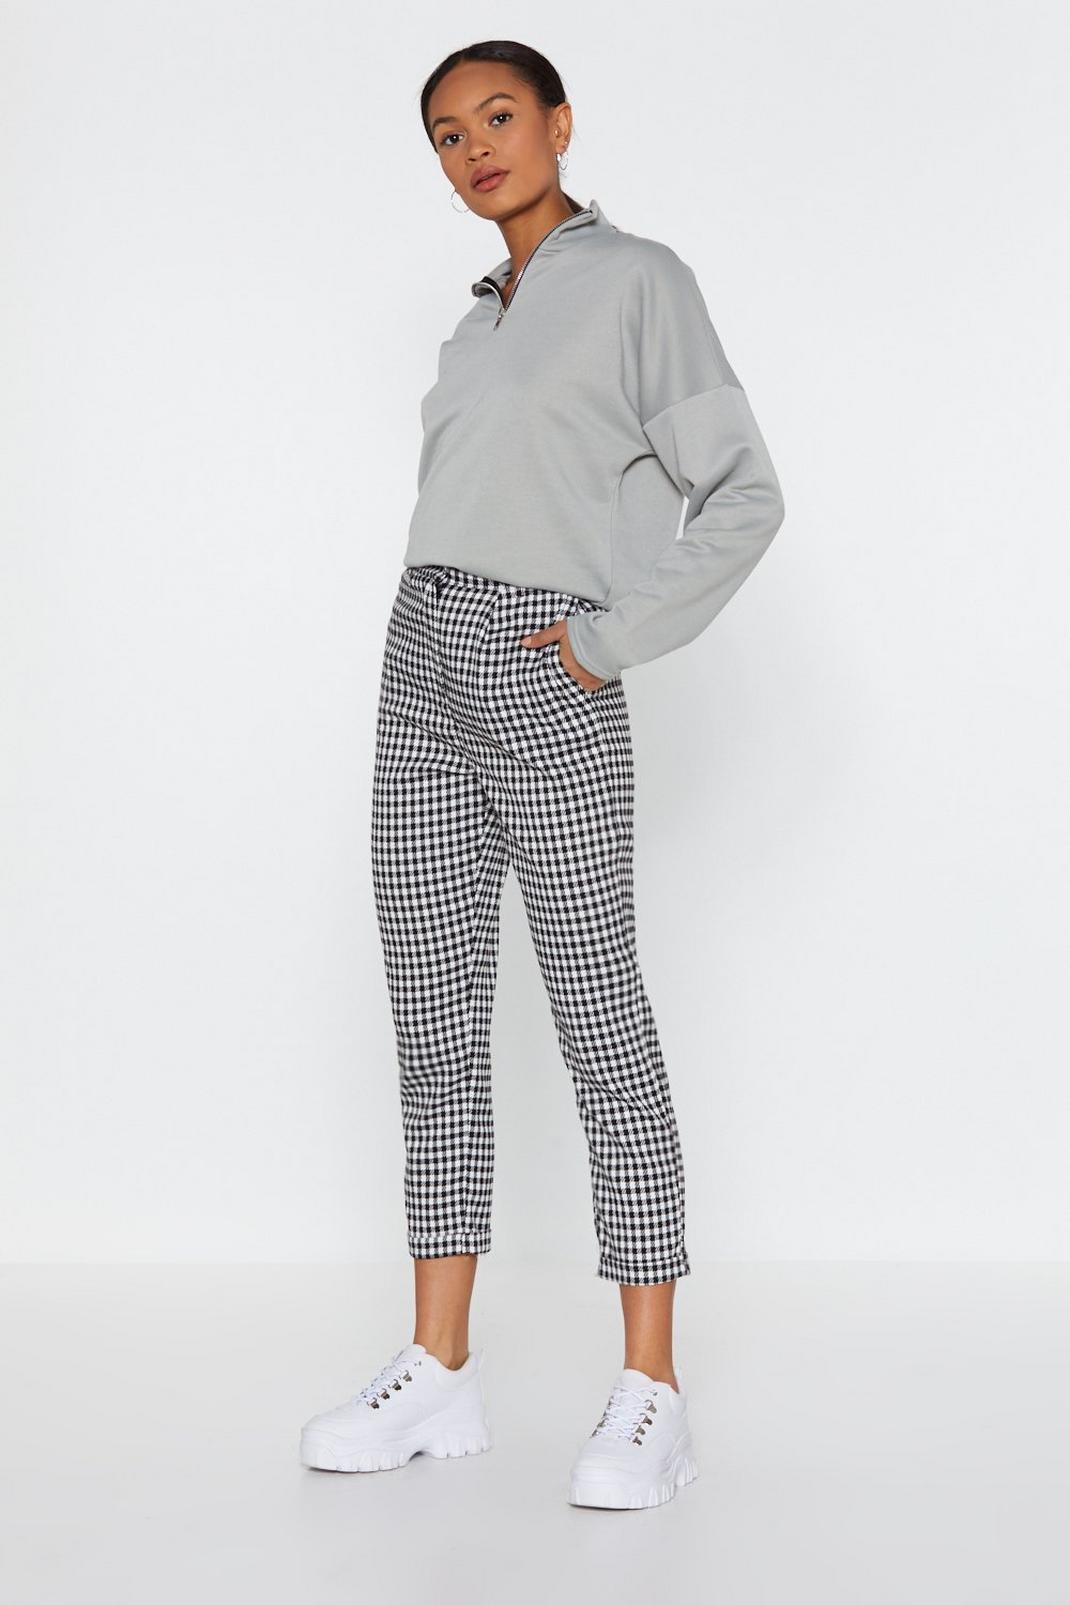 Square Do's Gingham Pants image number 1